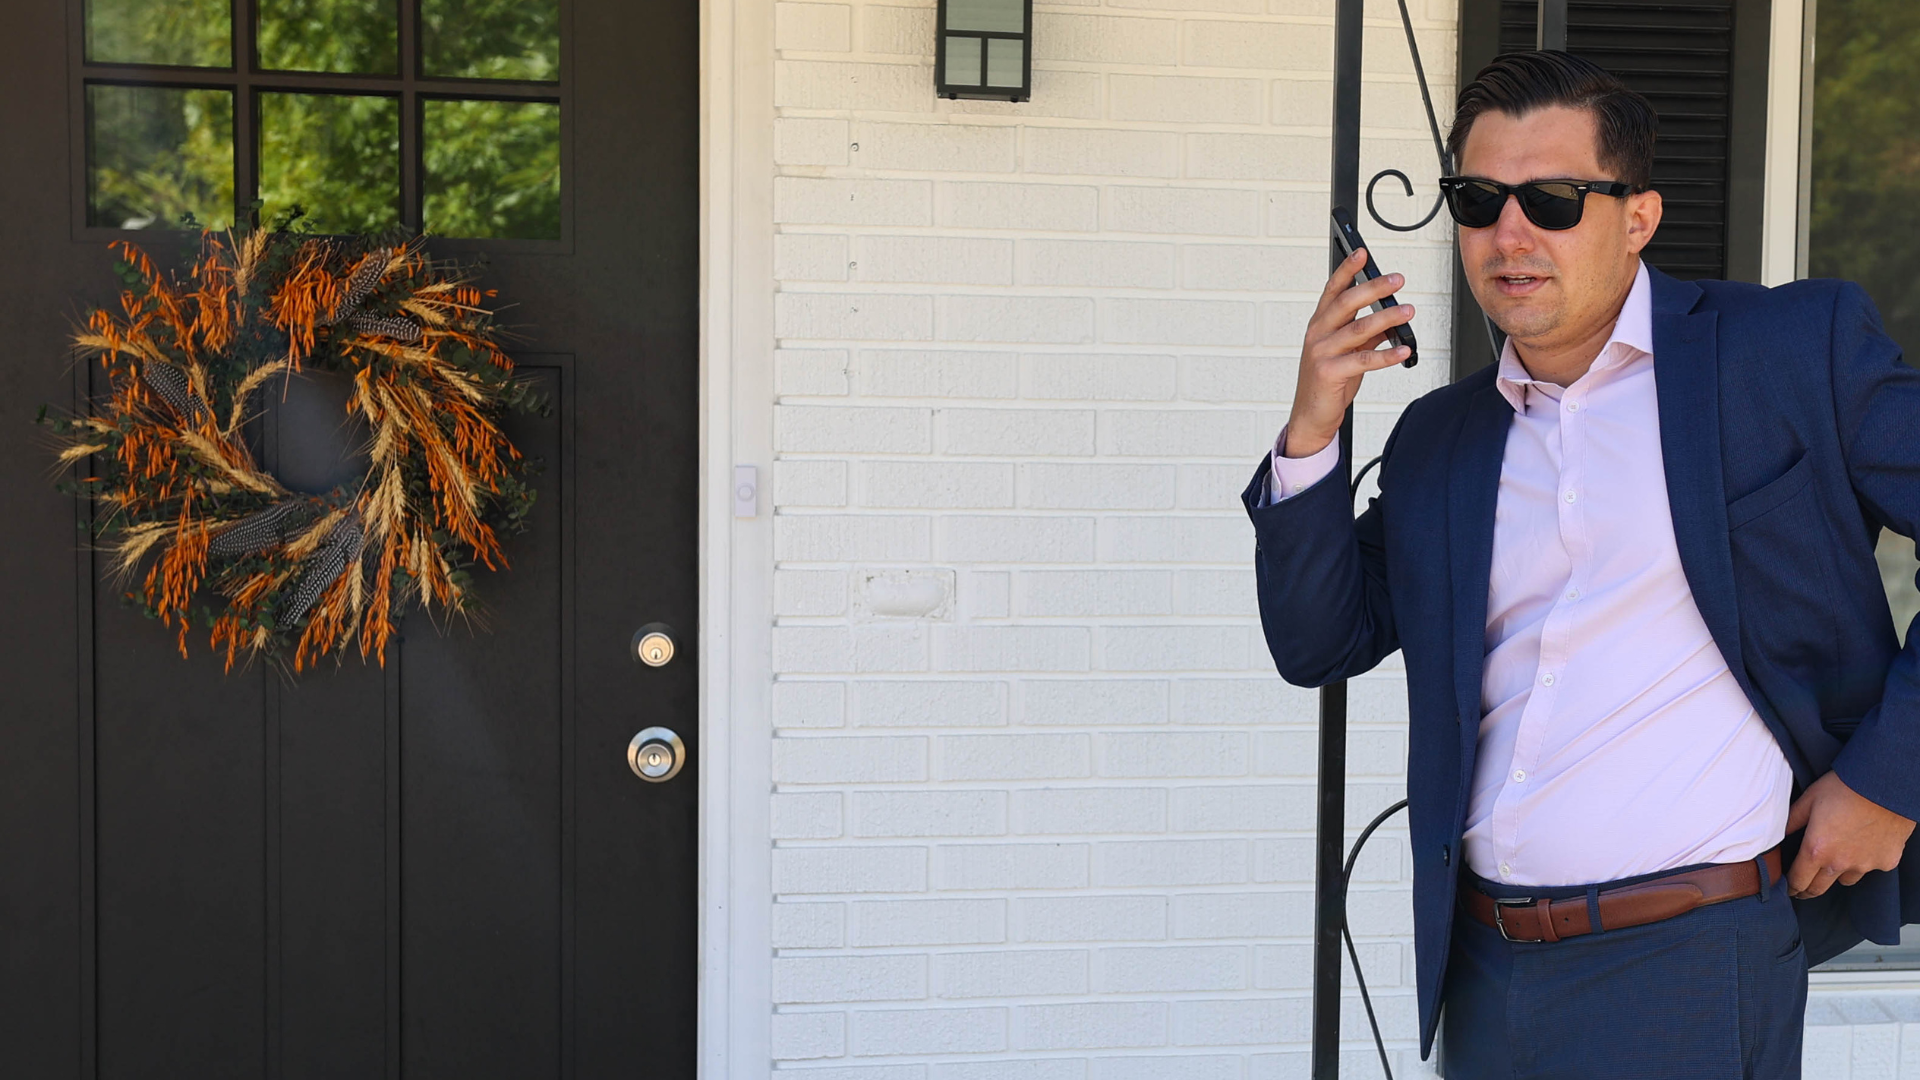 realtor on a phone call in front of a white house with a black door.